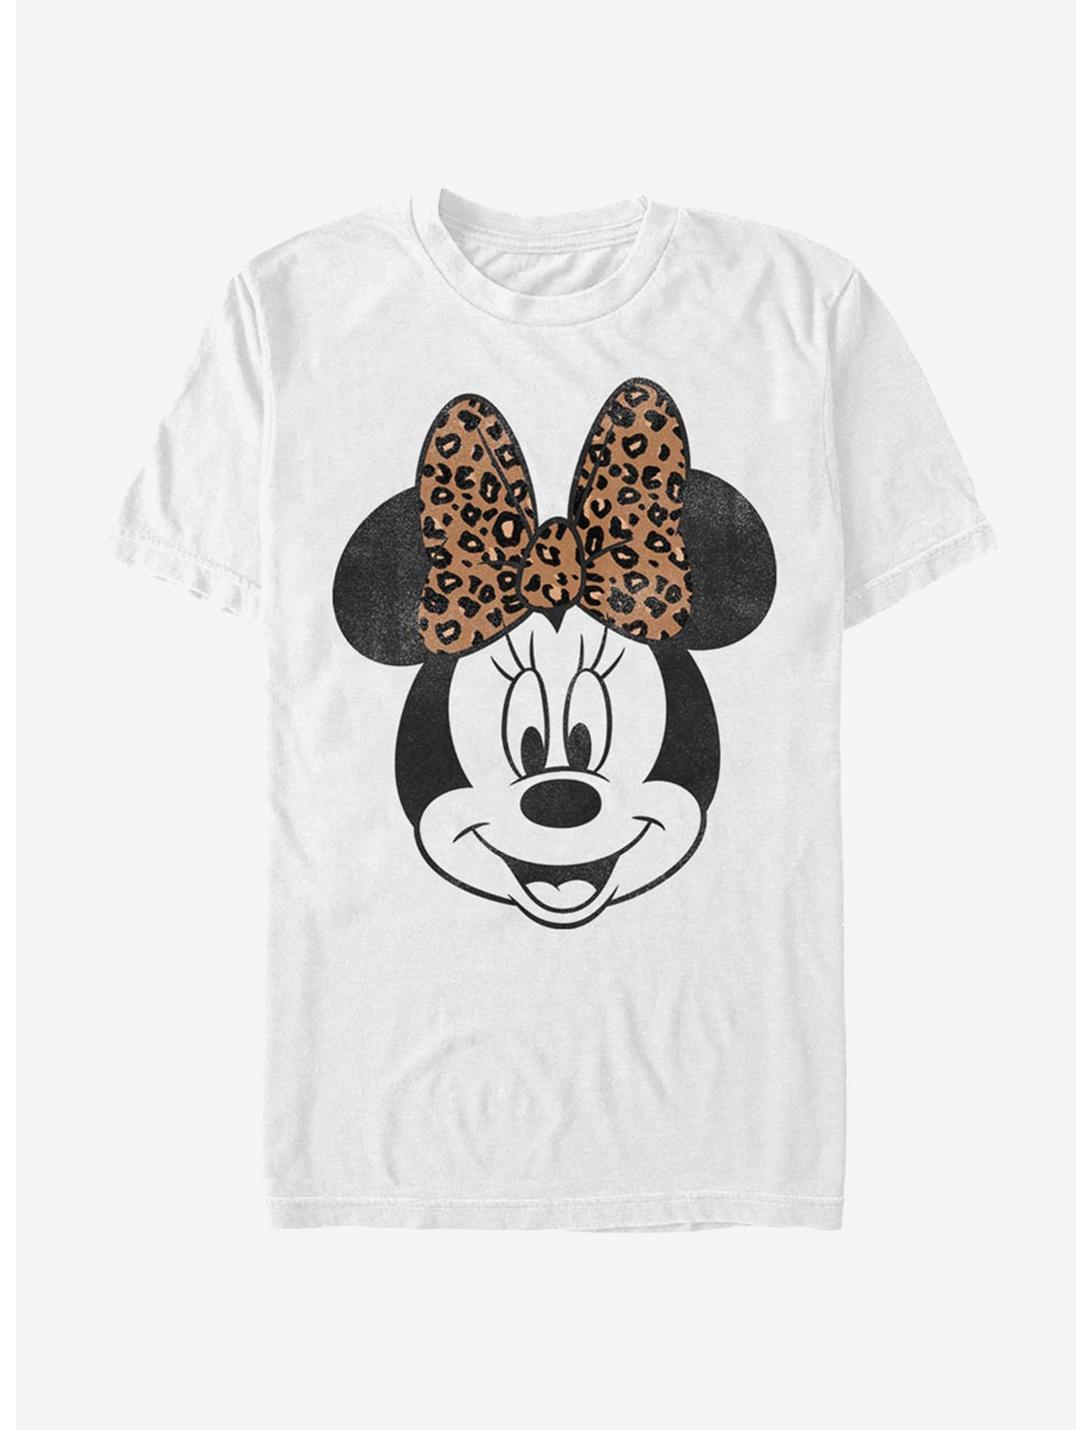 Disney Mickey Mouse Modern Minnie Face Leopard T-Shirt, WHITE, hi-res